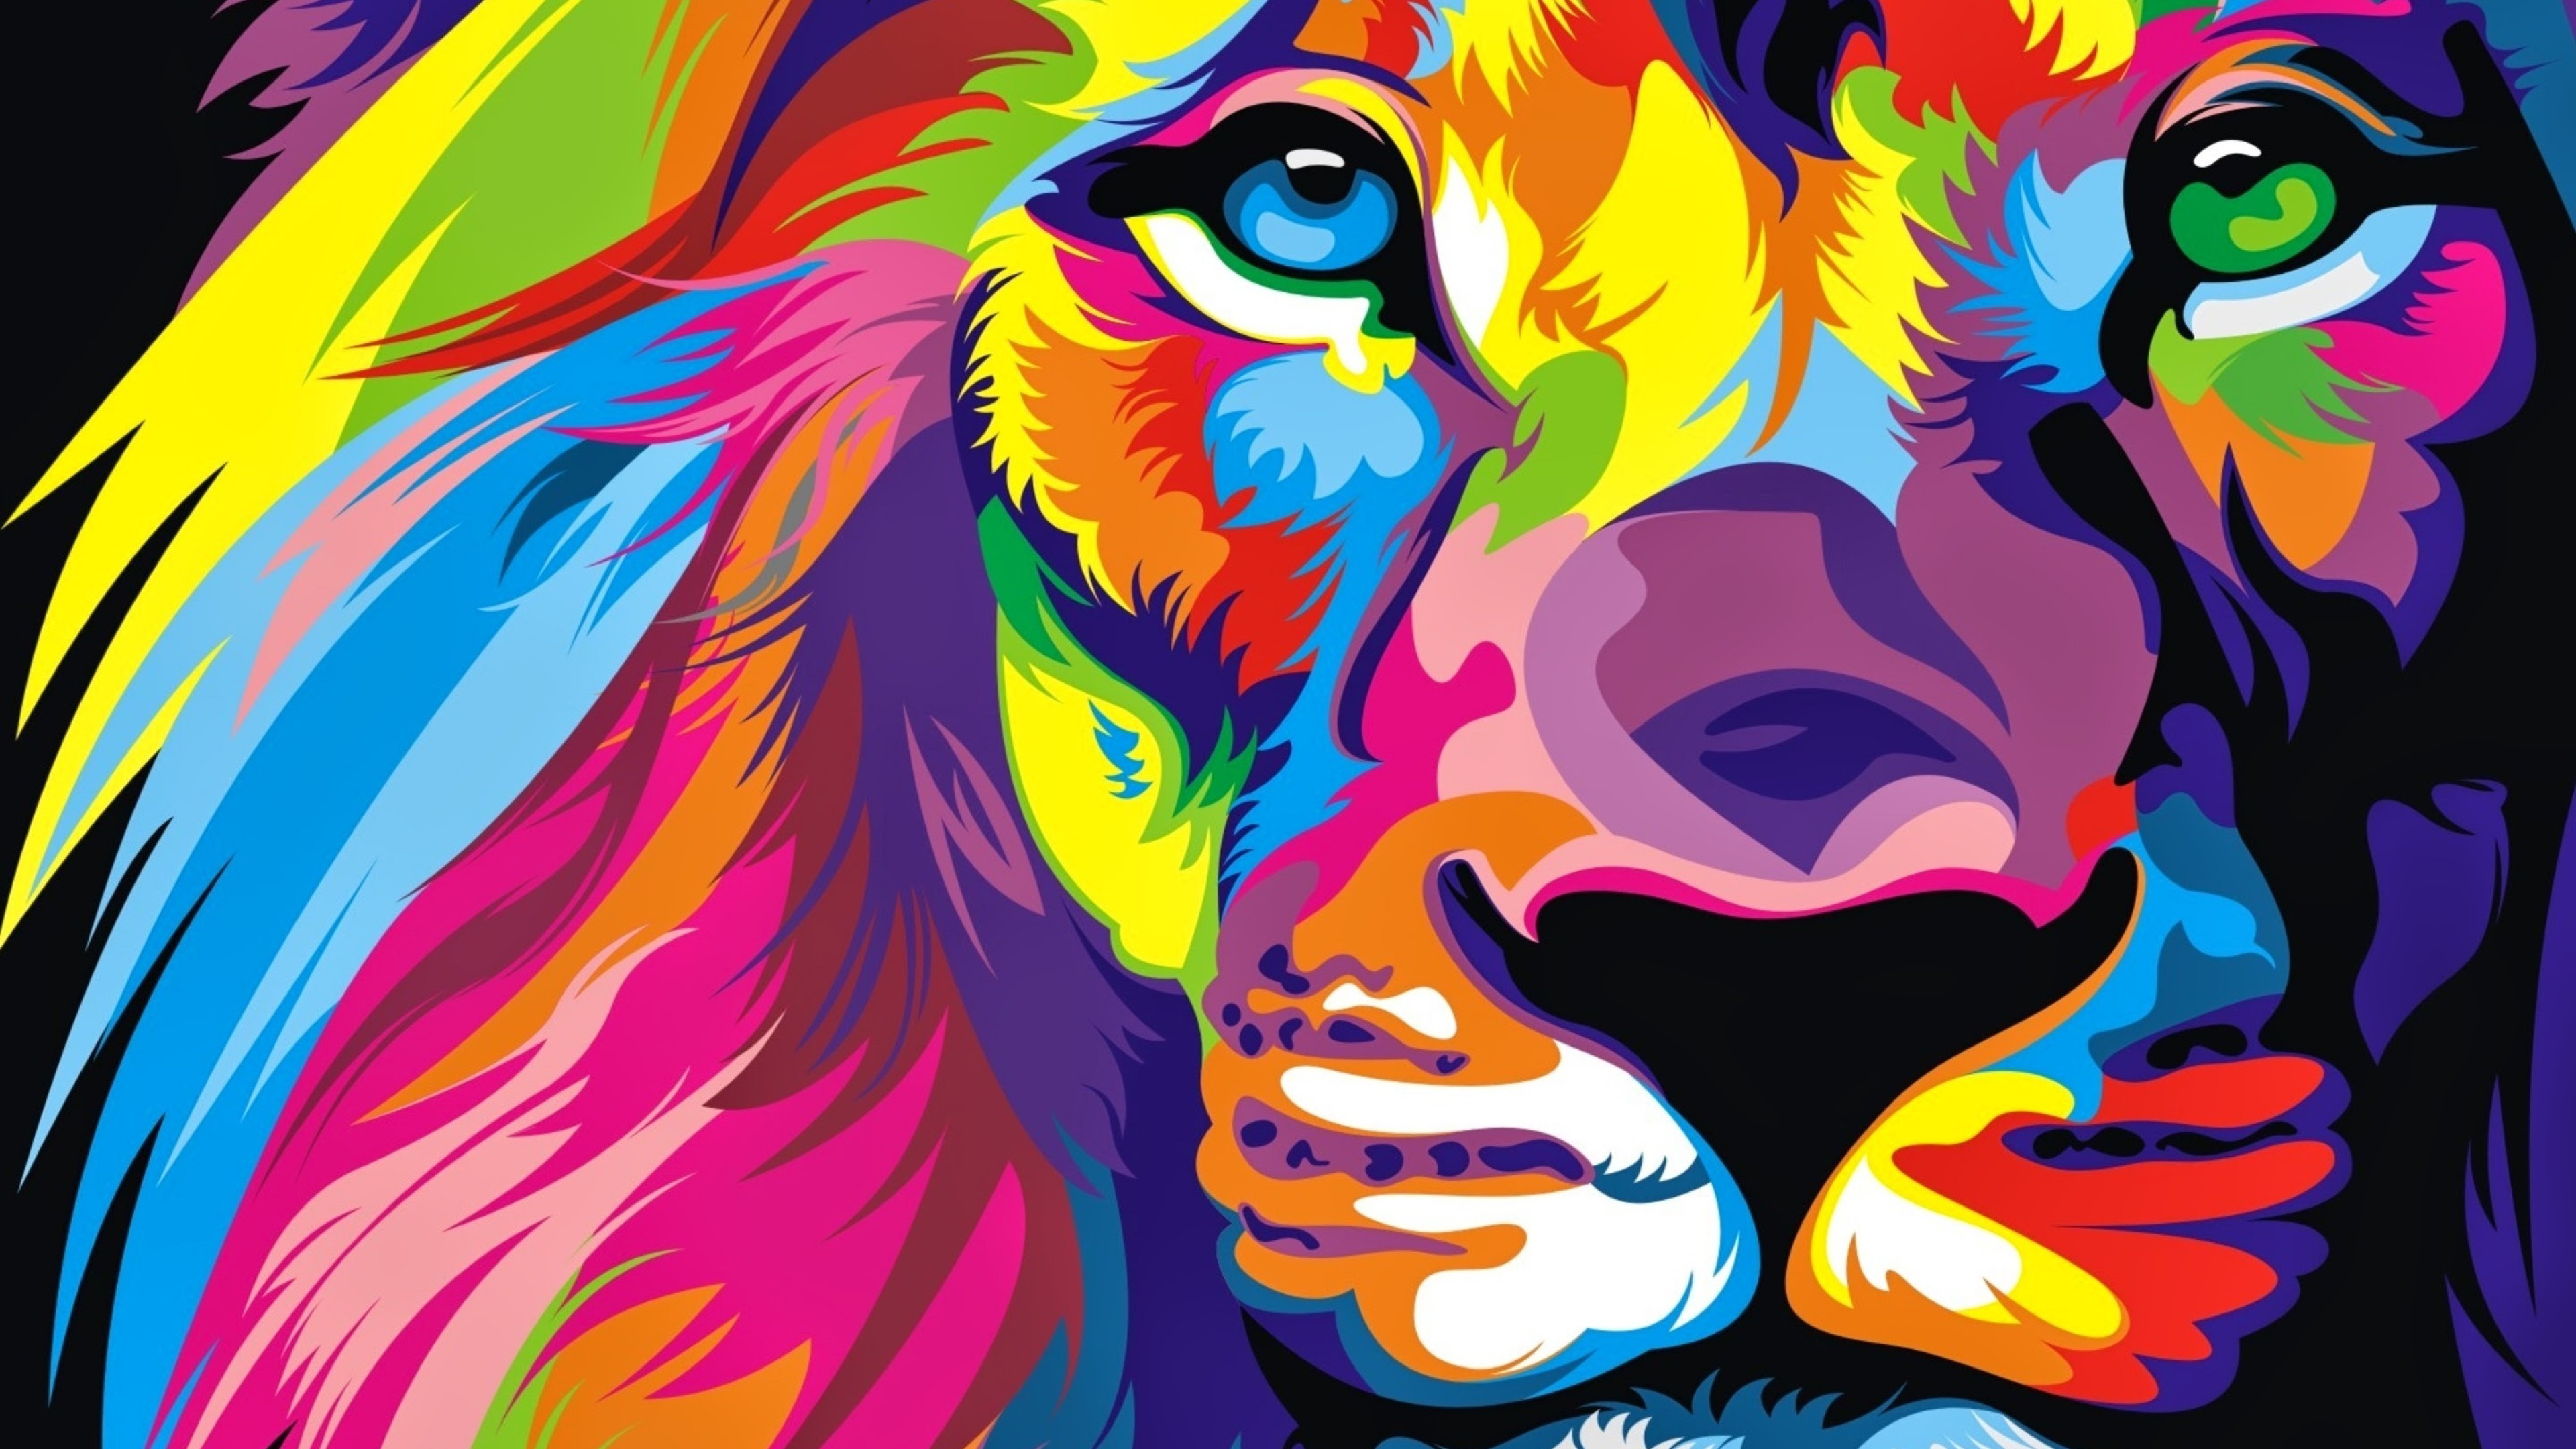 hd colourful wallpapers 1080p